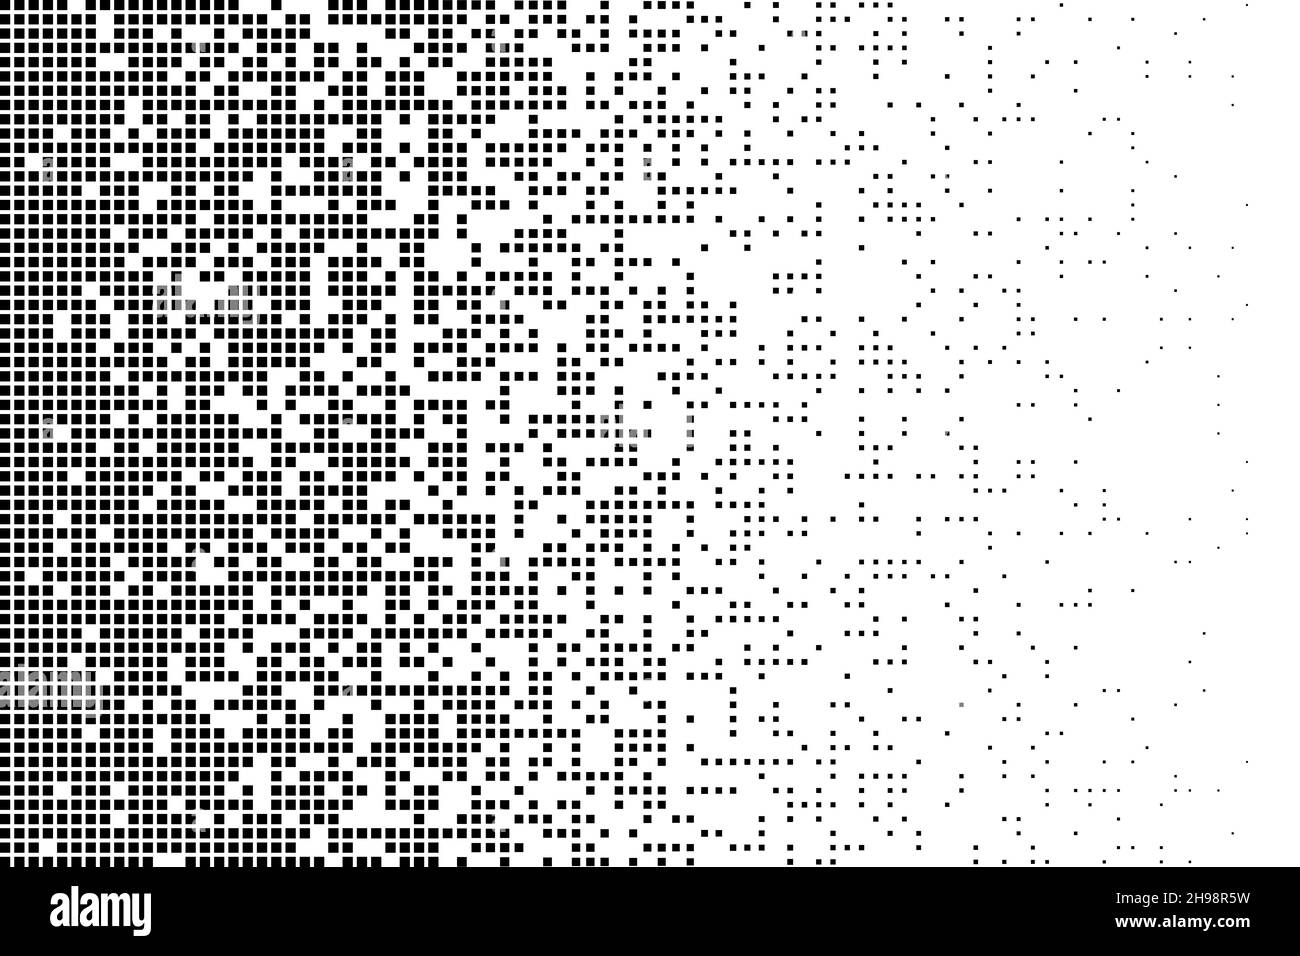 Pixel mosaic. Pixelated pattern, dispersion grayscale background. Business art gradient, square flying. Halftone matrix, blocks falling recent vector Stock Vector